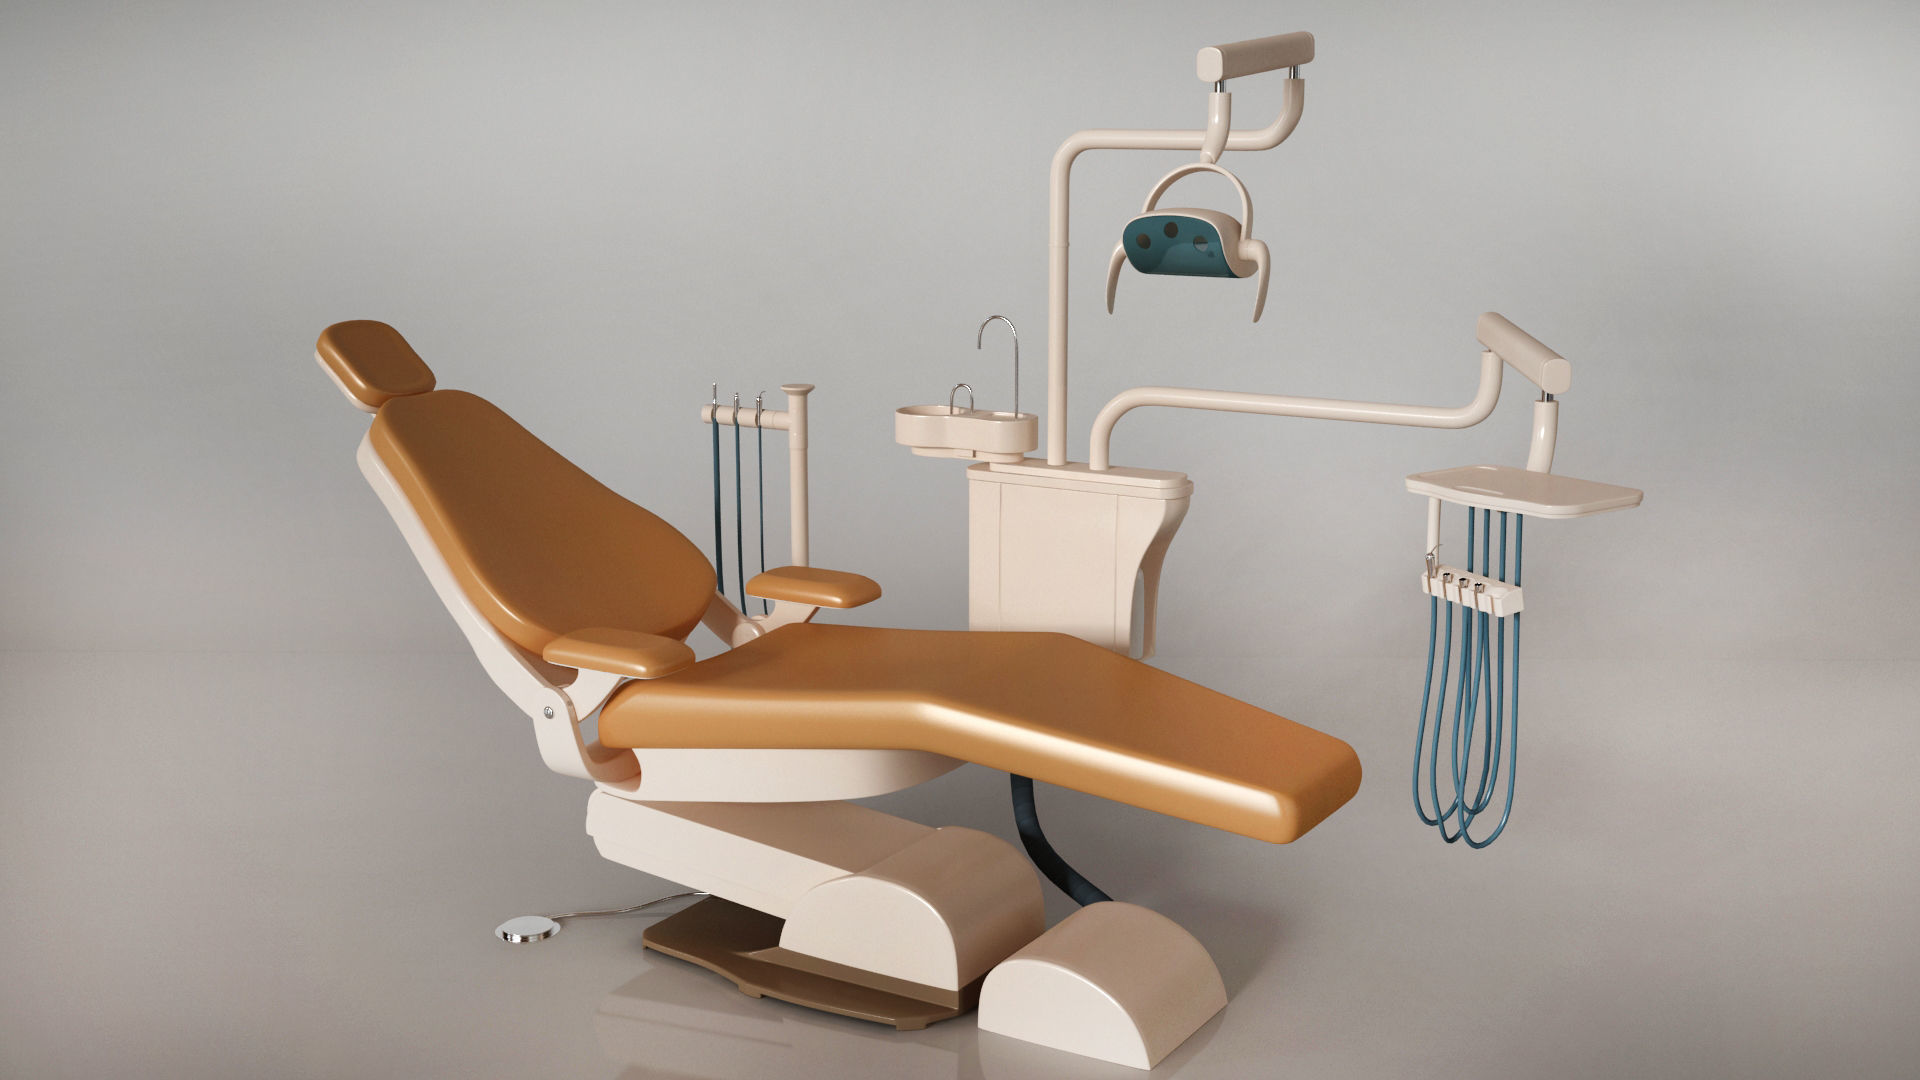 Fully equipped dental chairs